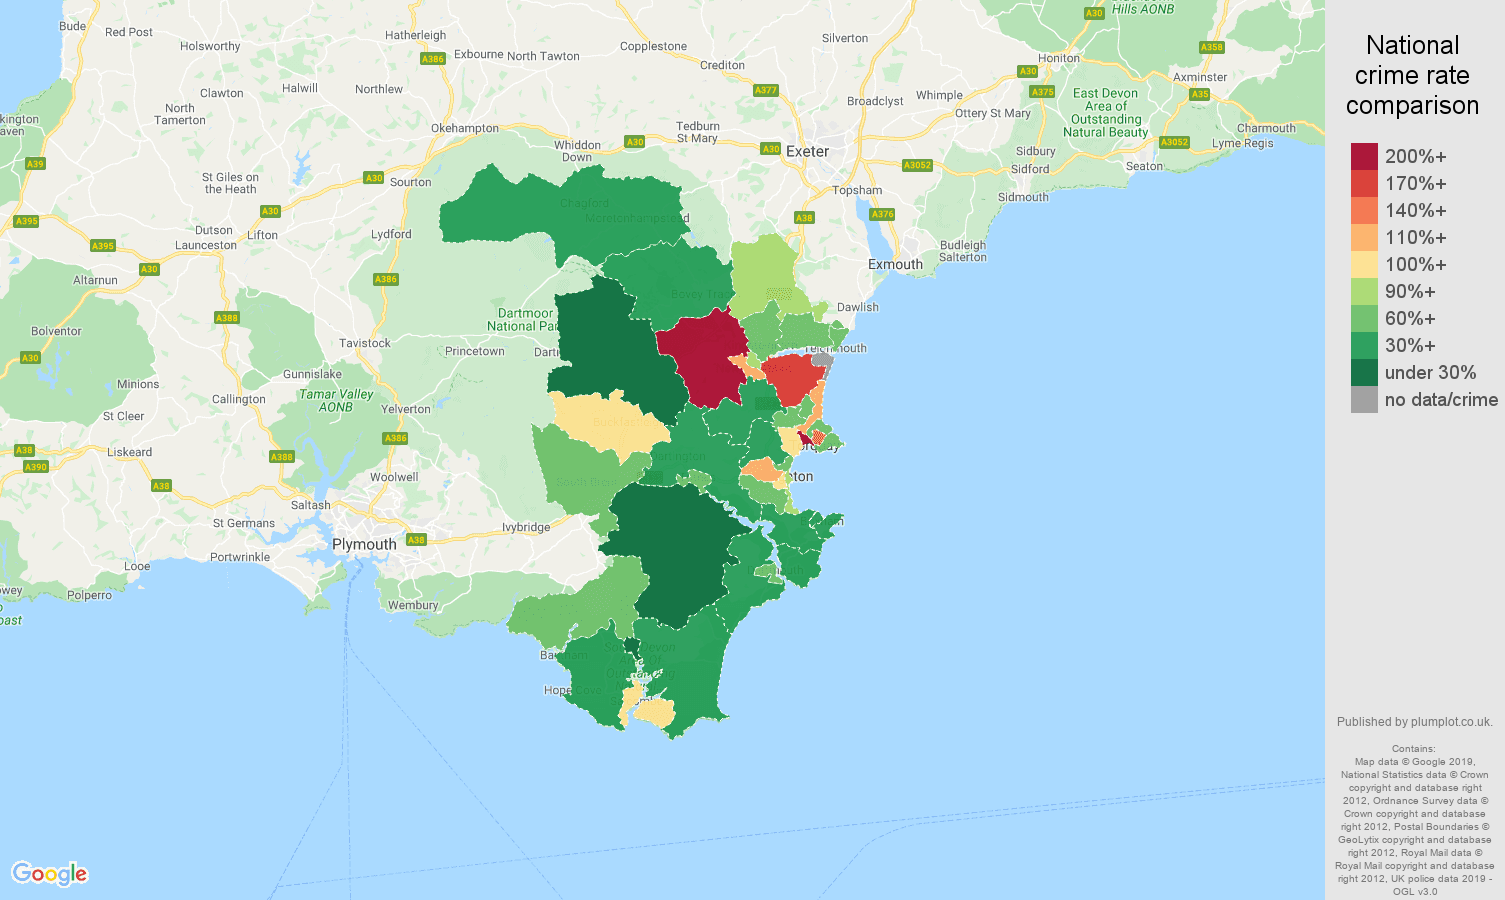 Torquay other crime rate comparison map